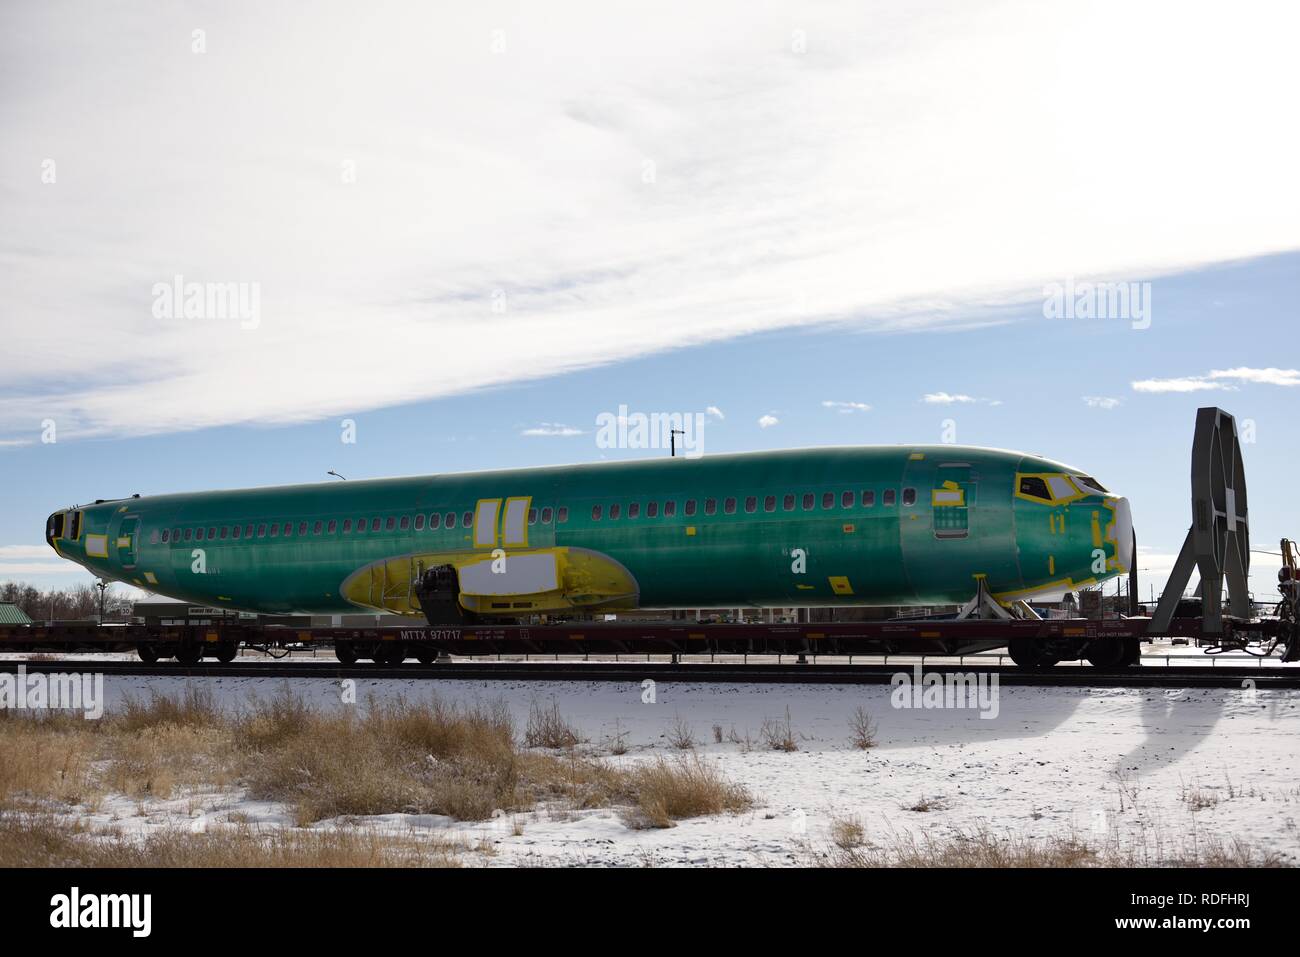 Newly manufactured Boeing 737 narrow body aircraft fuselage being transported by train to final assembly plant. Stock Photo